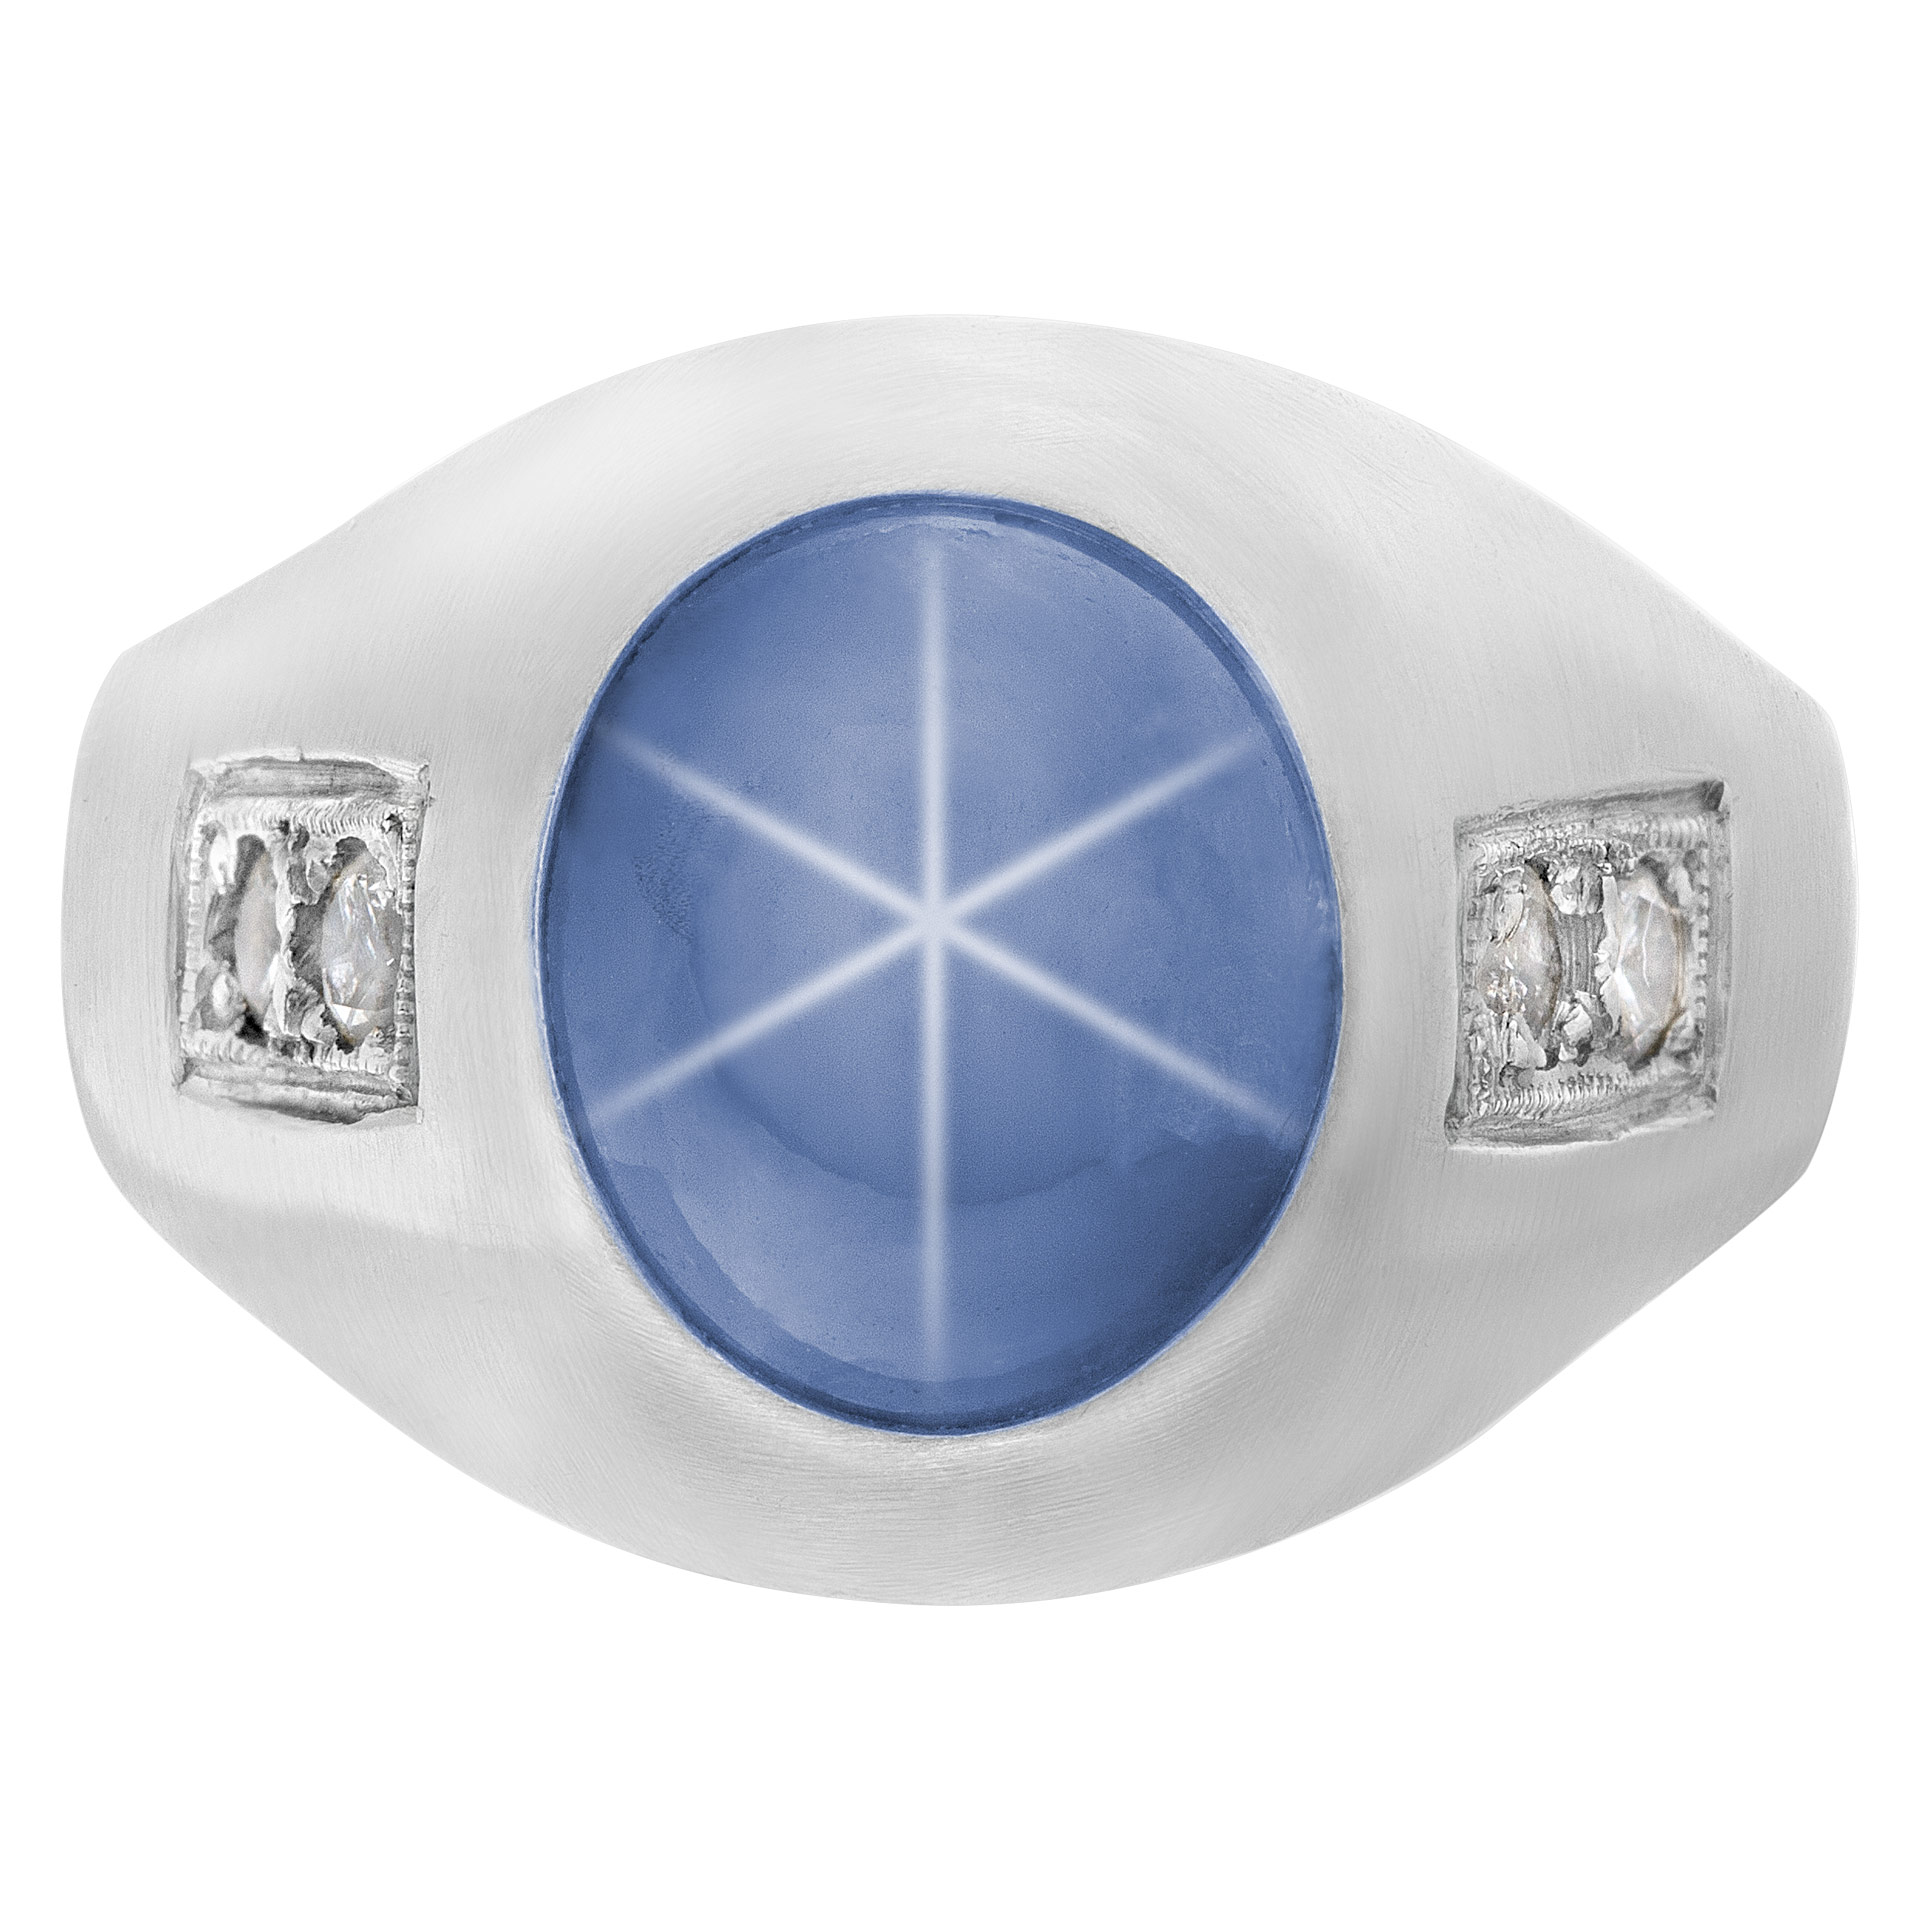 Star Sapphire ring in 14k white gold with diamond accents image 1